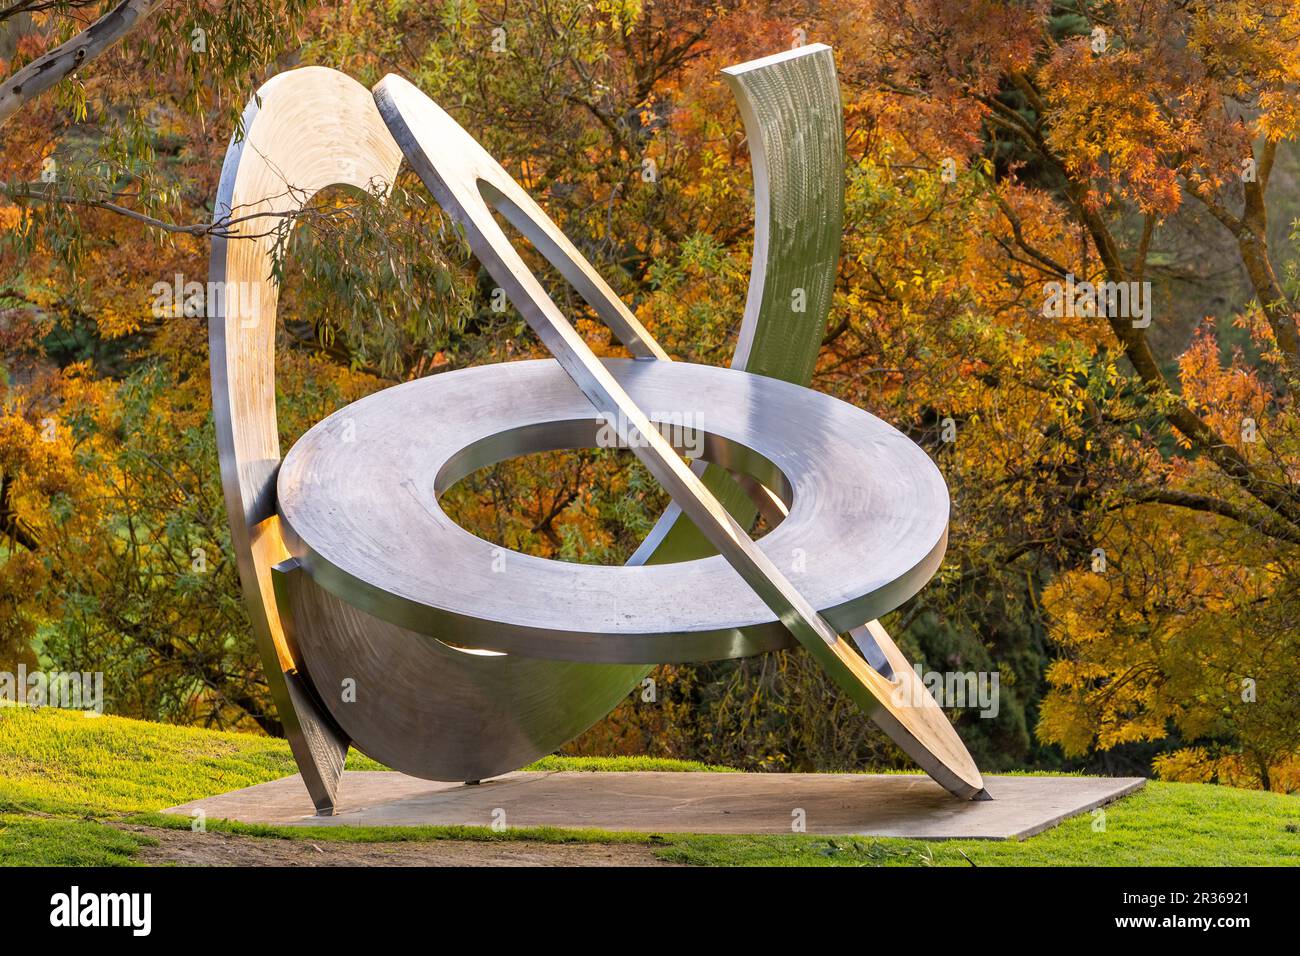 Inge King sculpture Rings of Saturn in front of autumn foliage at Heide Museum of Modern Art, Victoria, Australia. Stock Photo